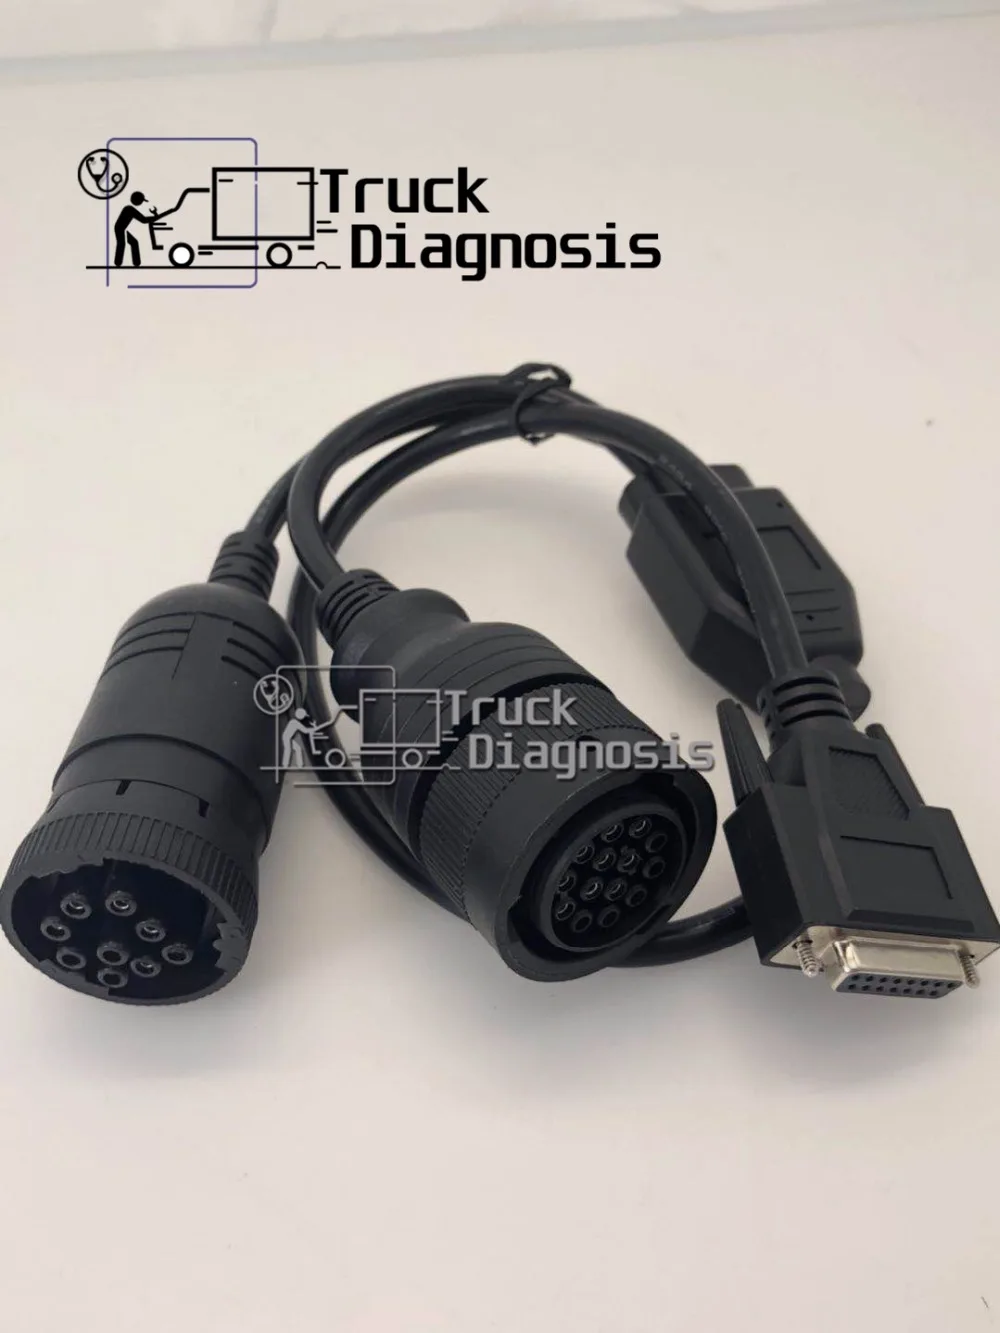 

9 pin + 14 pin connector cable for cat ET 3 Communication comm 3 excavator diagnostic tool adapter III et4